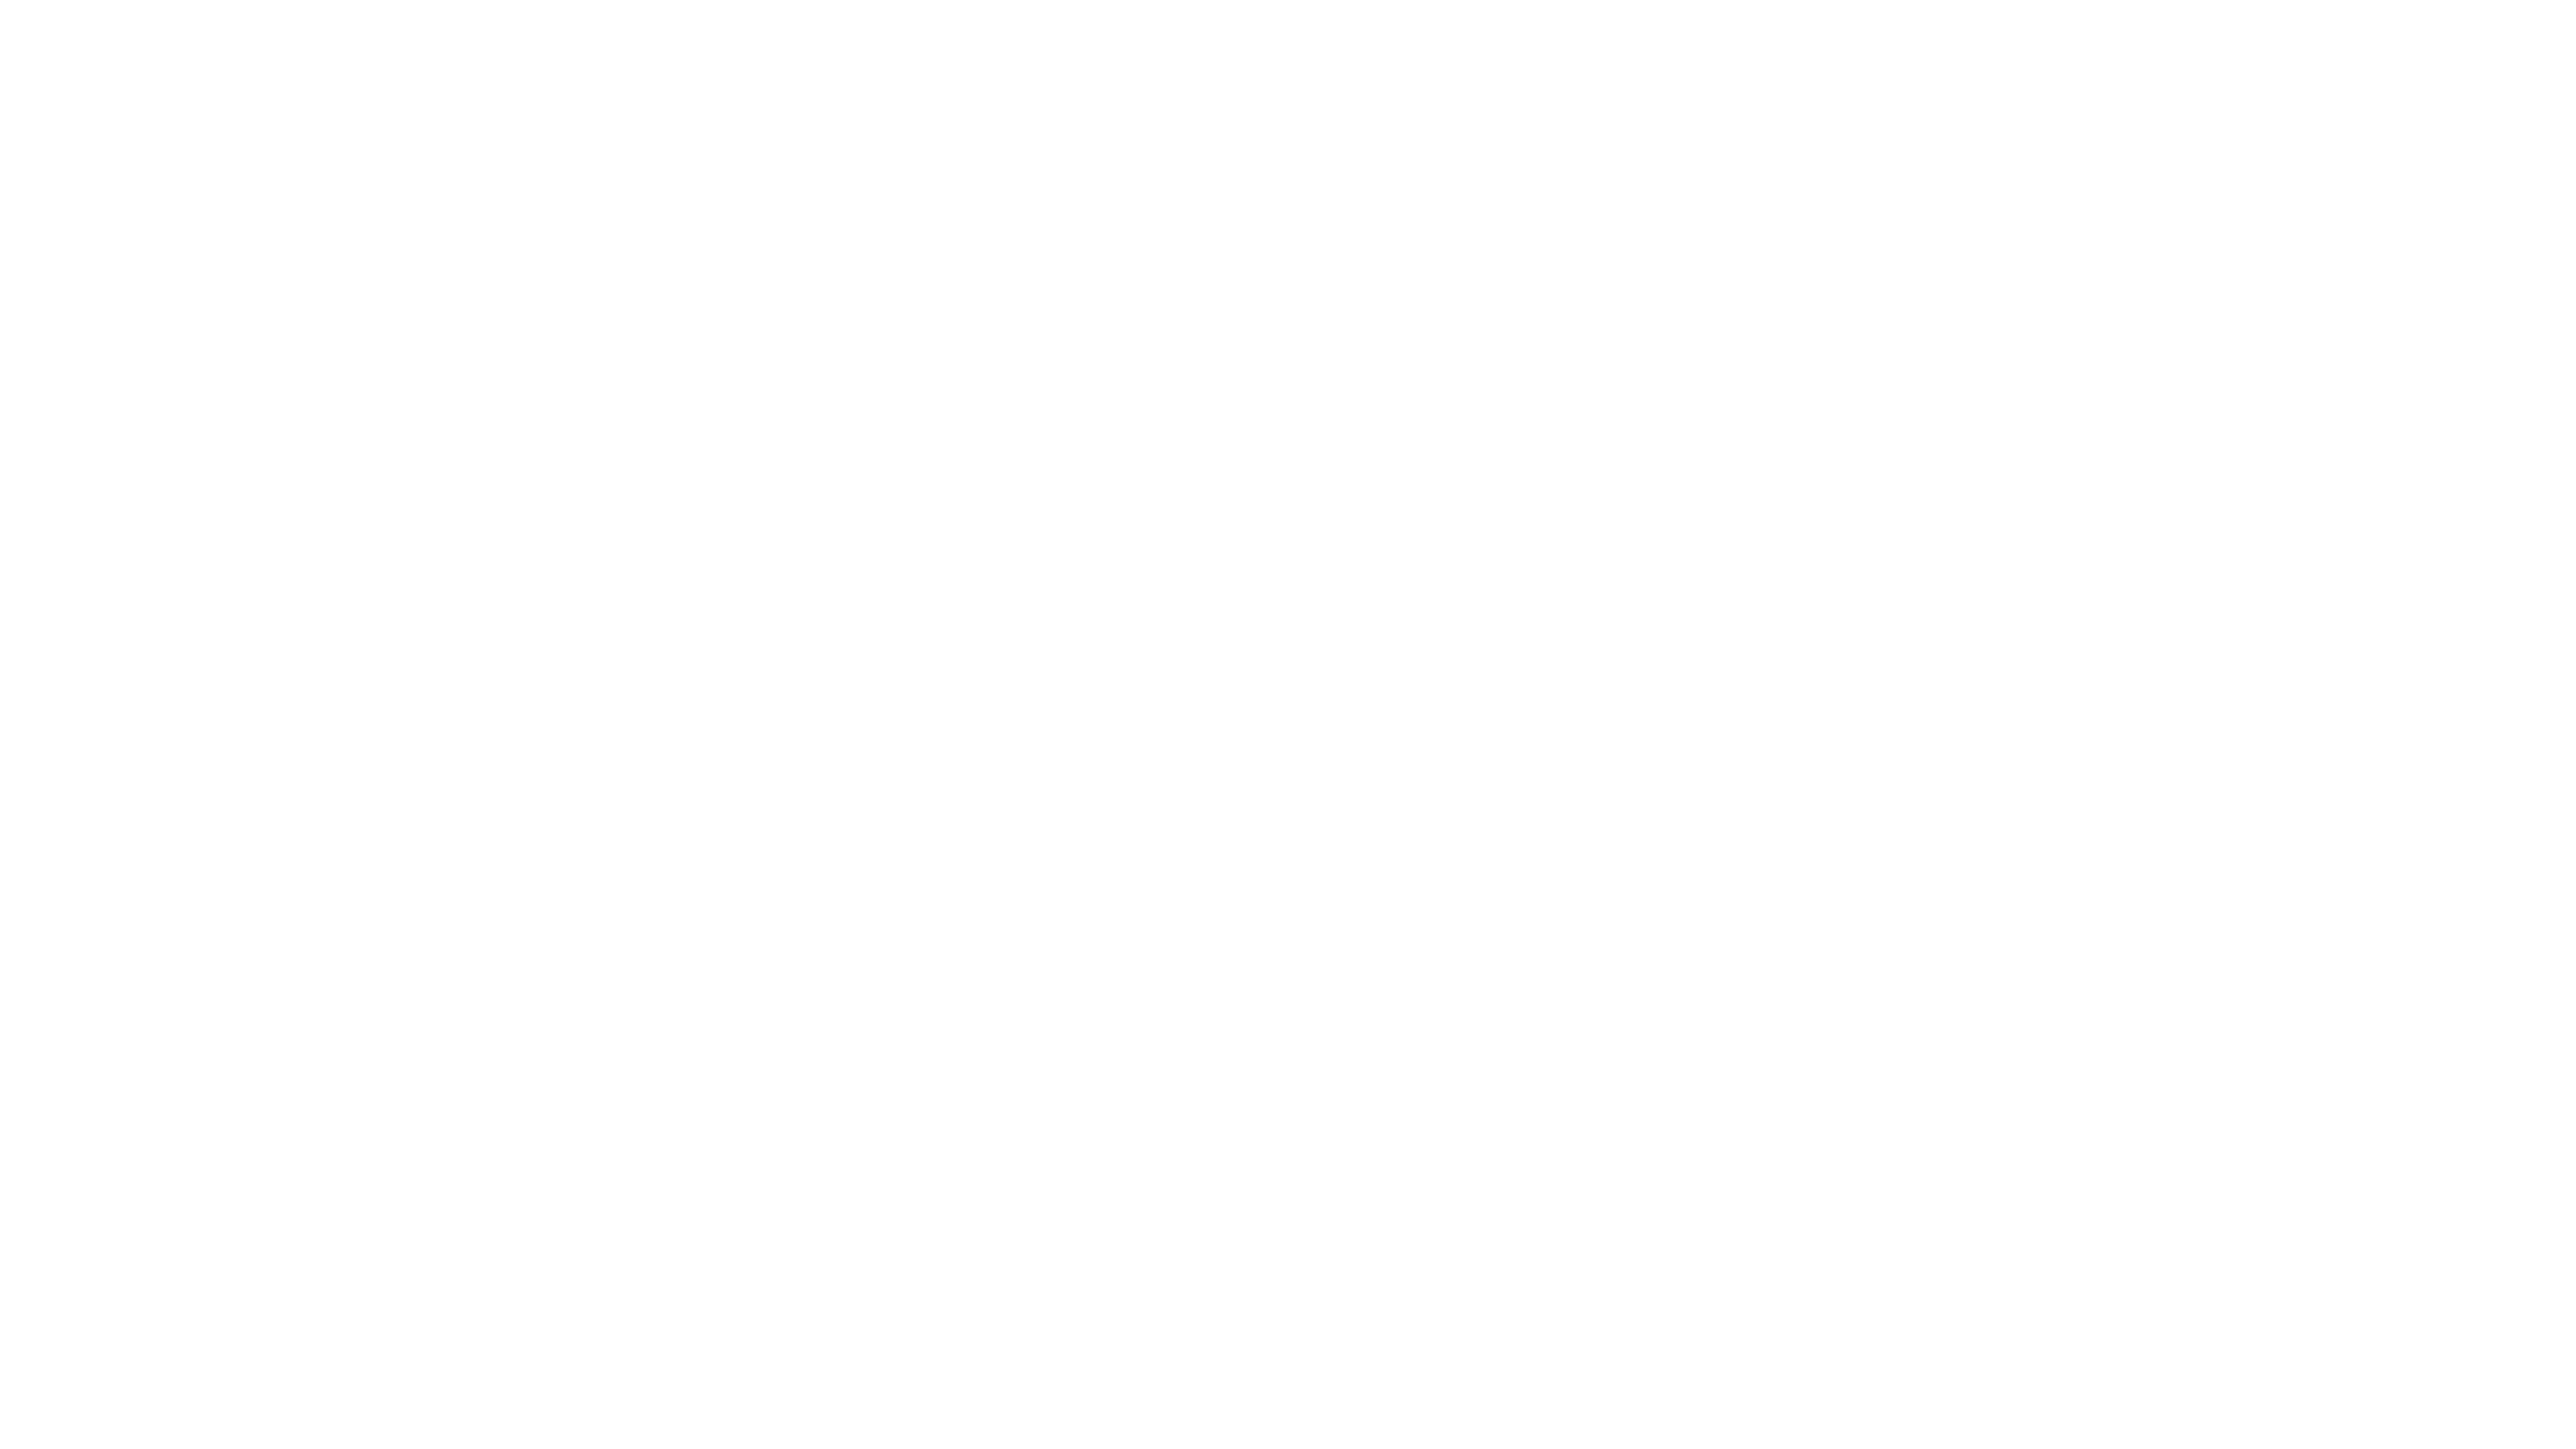 Logo The Climate Factory